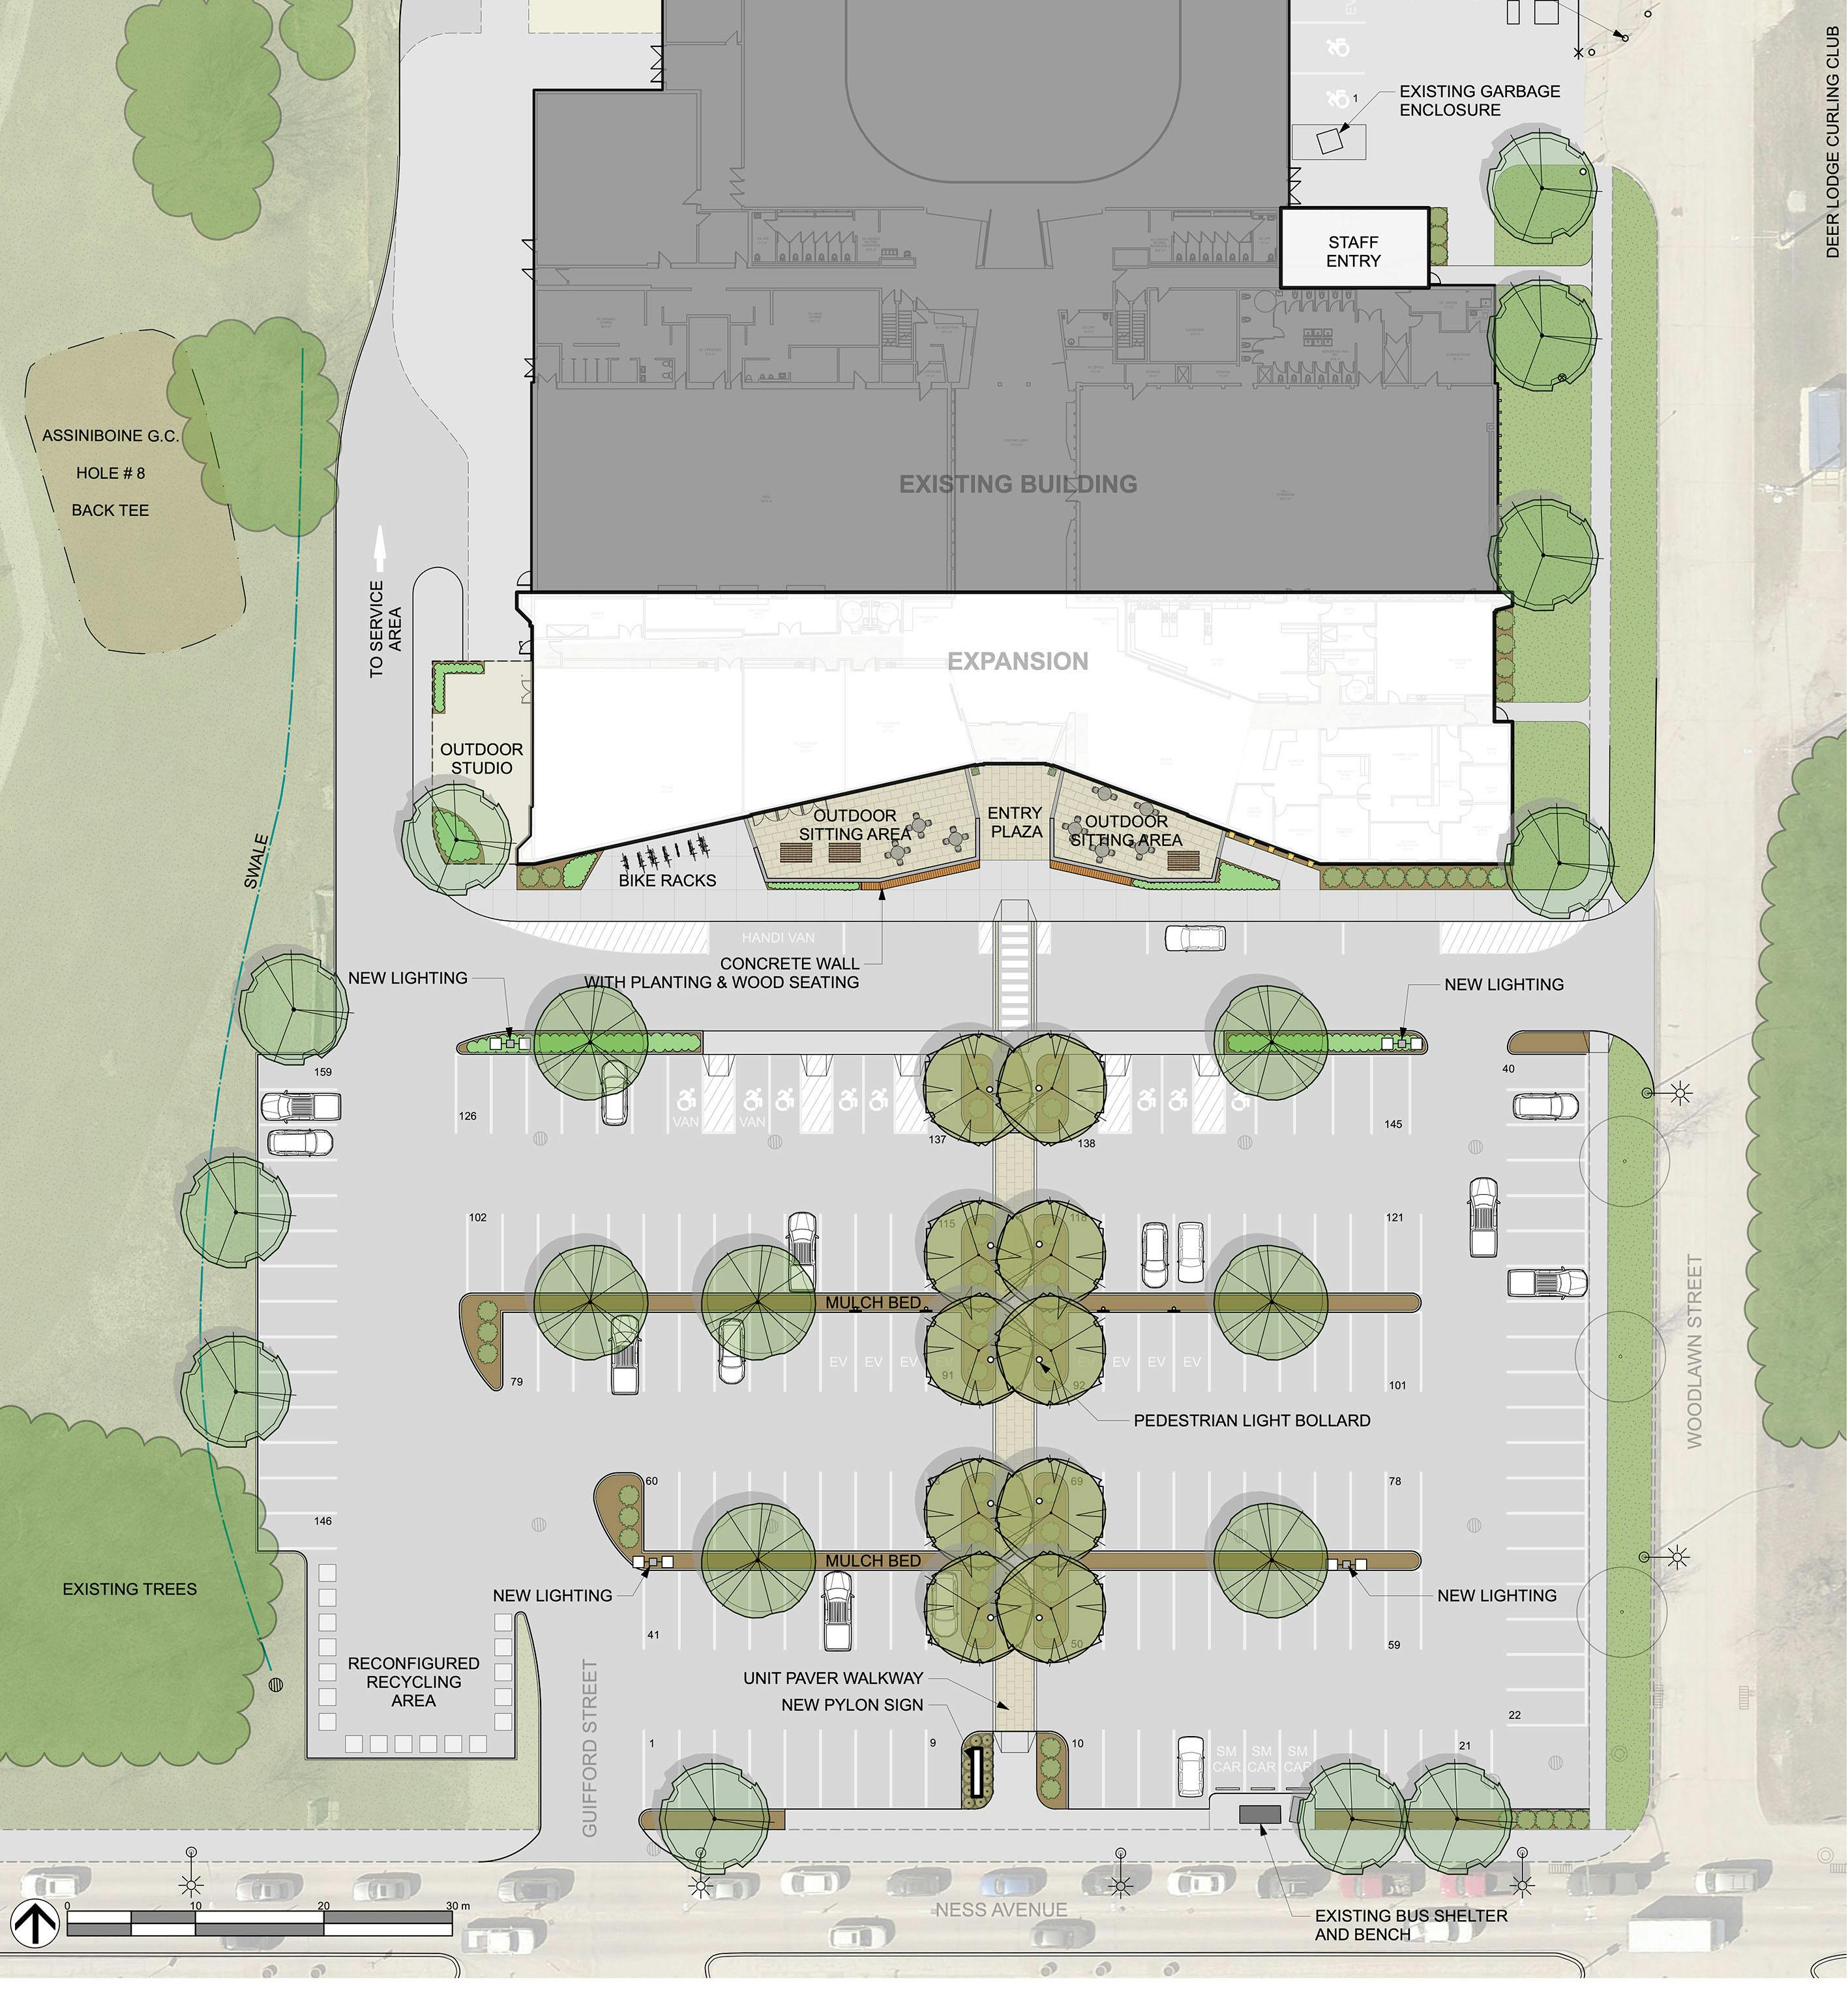 Site plan and parking